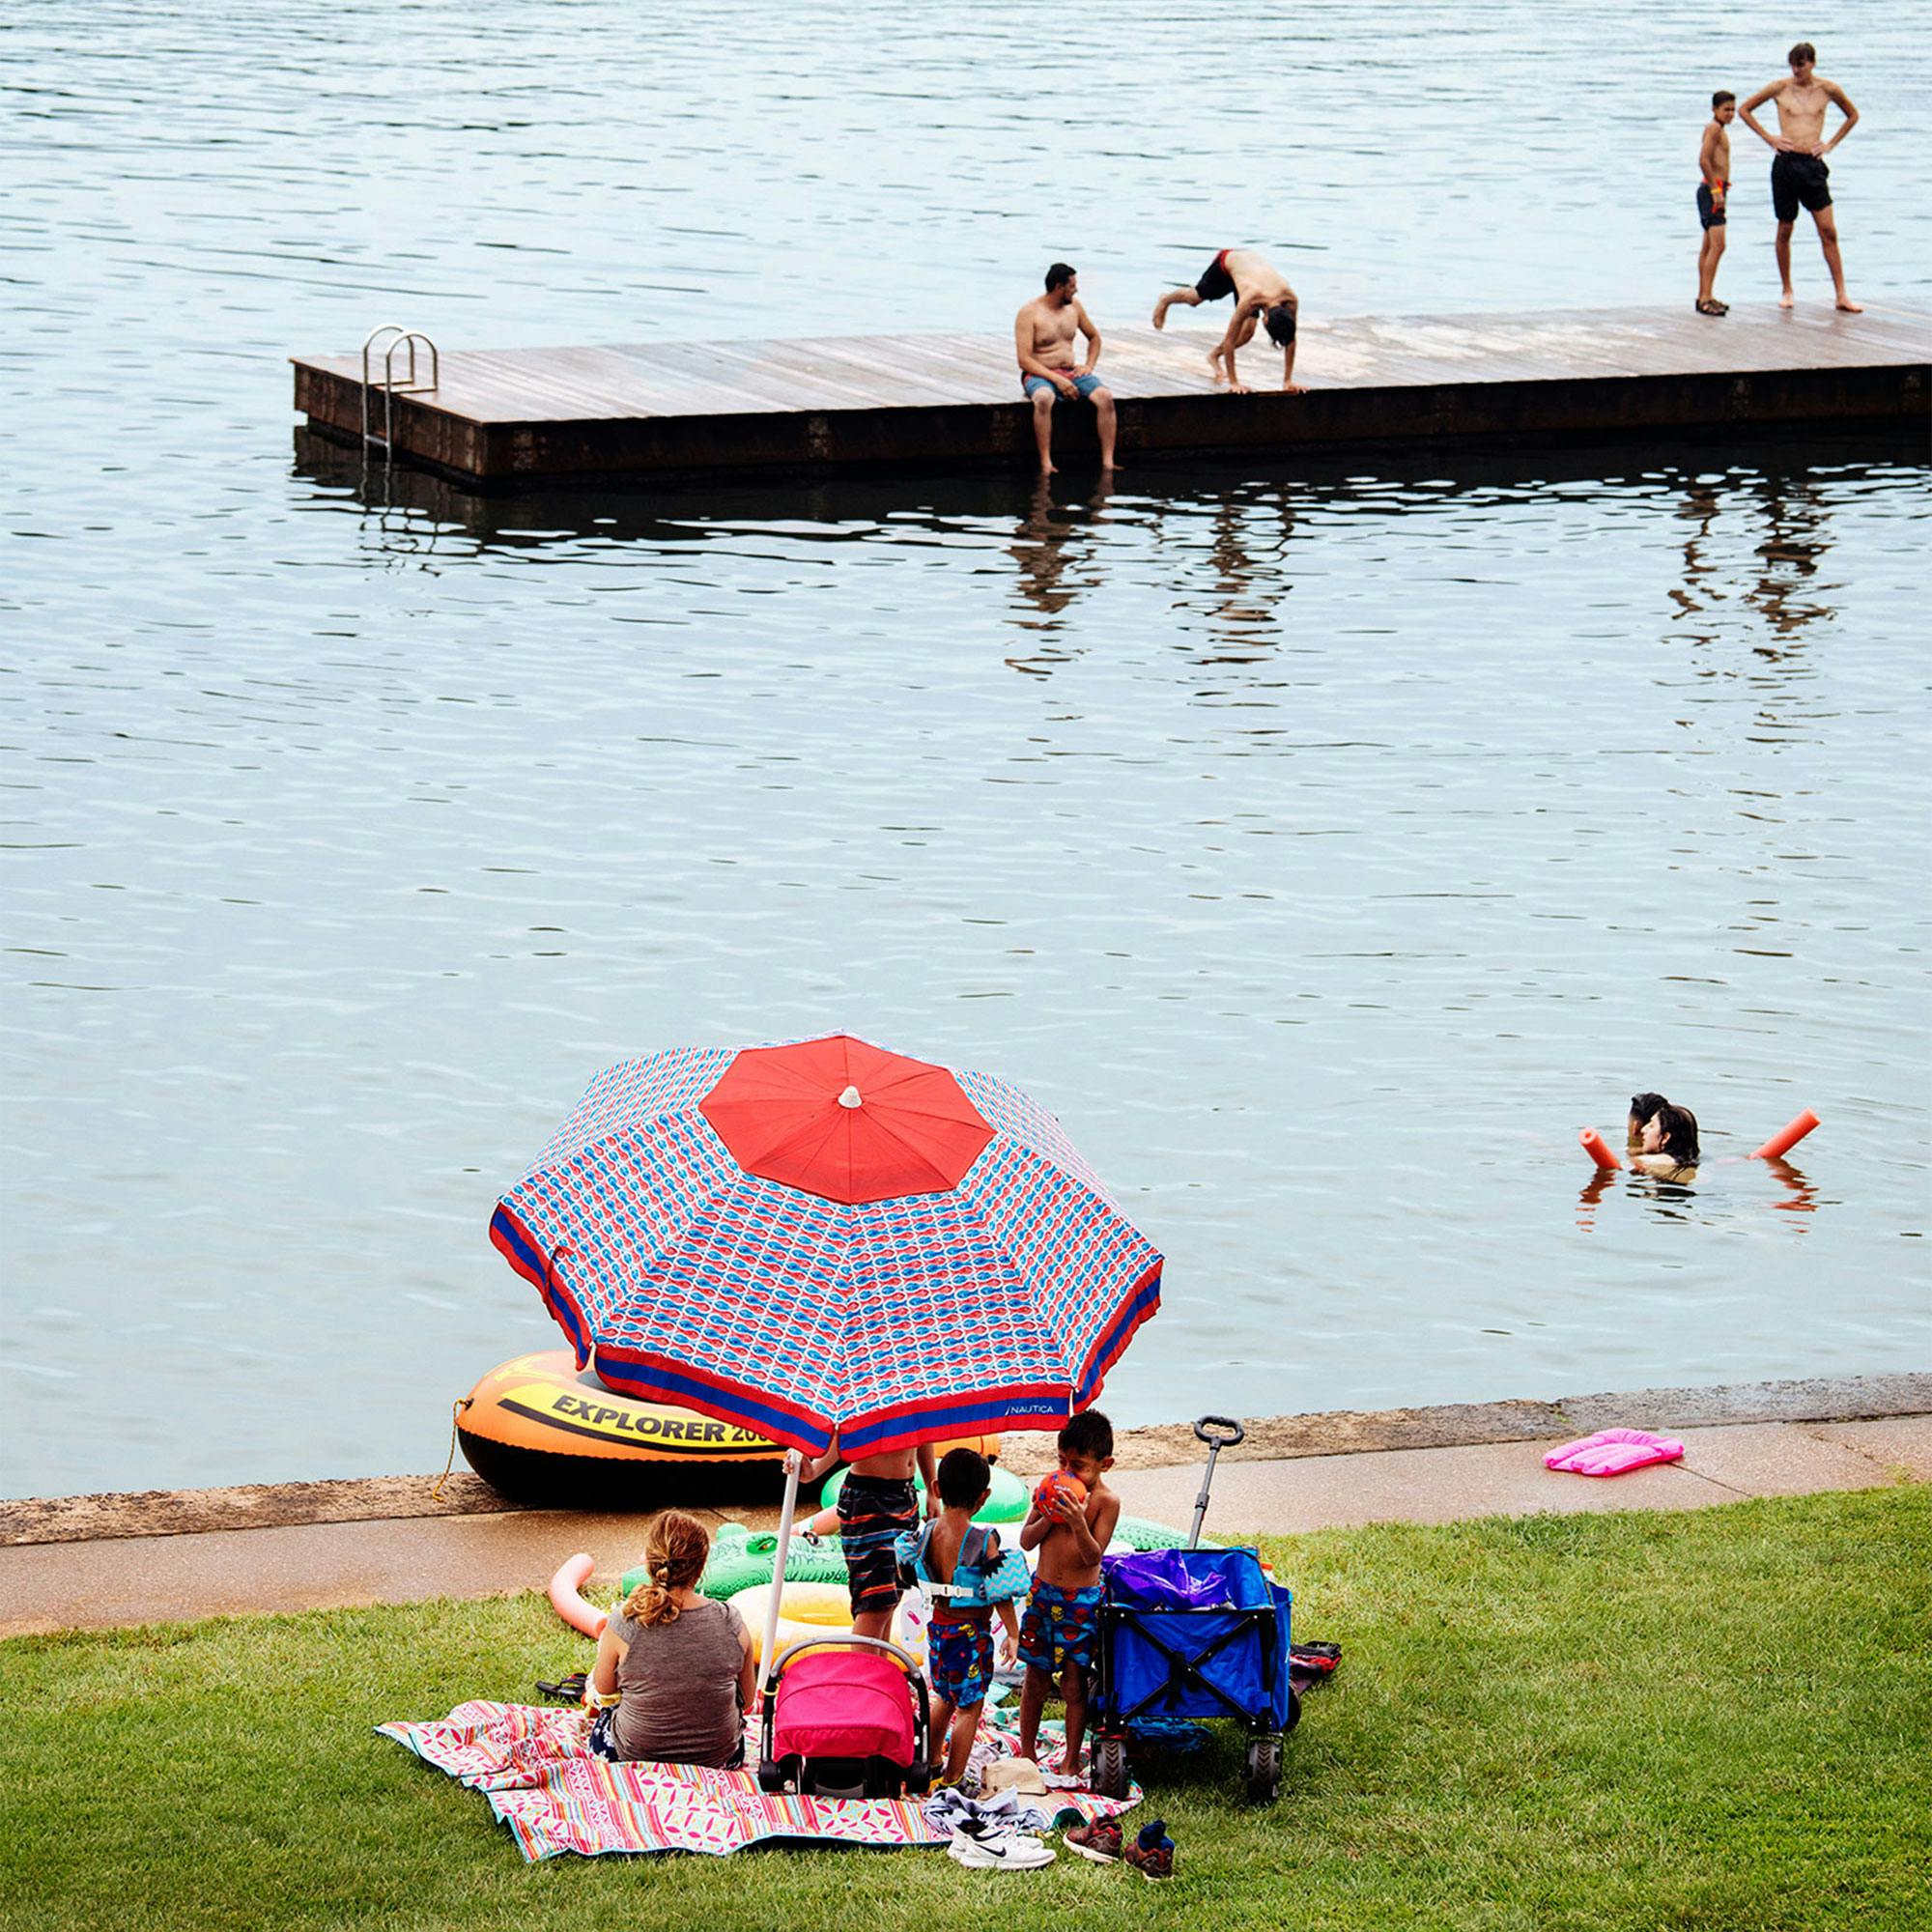 Carefree park-goers enjoying the lake pre-pandemic, in August 2019.